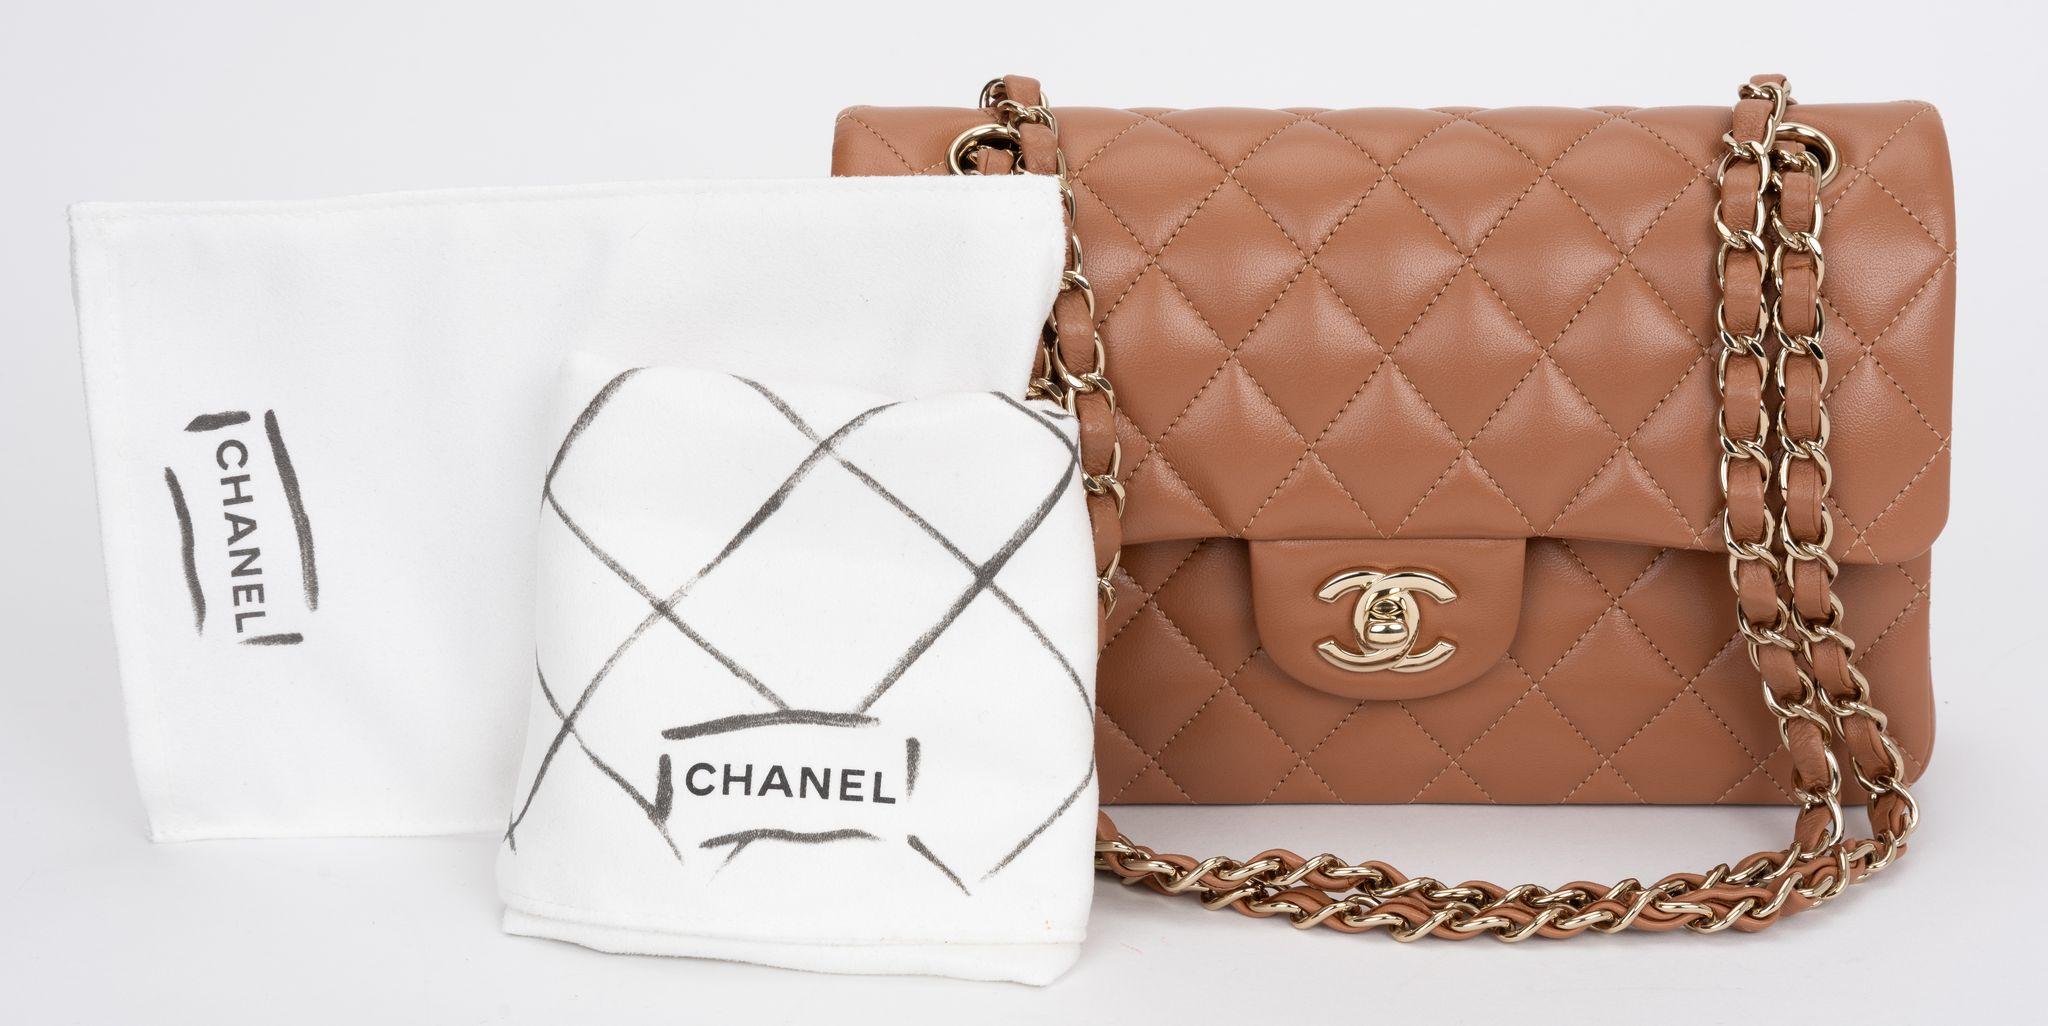 Chanel Classic Caramel Double Flap Bag For Sale 4